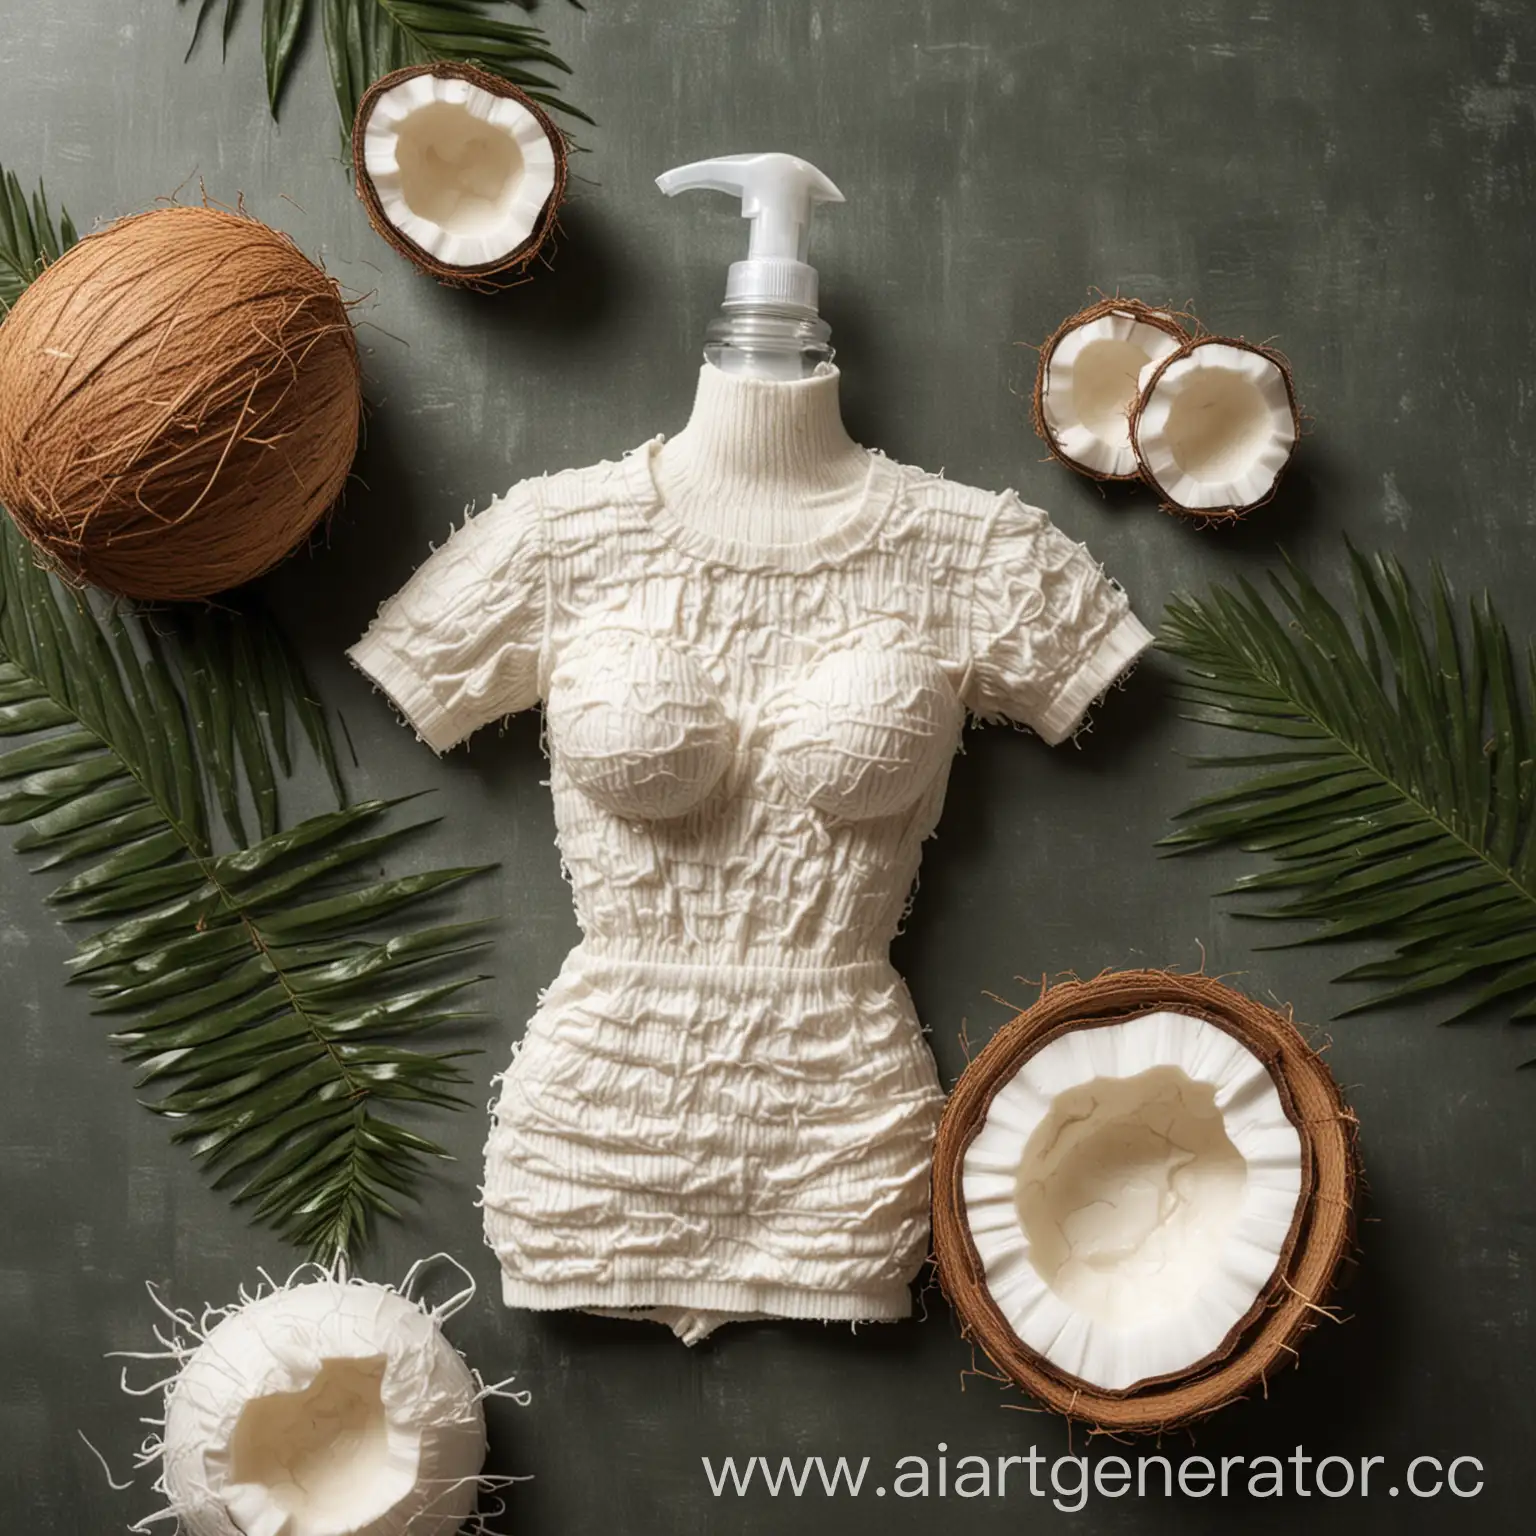 Fashionable-Clothing-Adorned-with-Coconut-Squeezed-Oil-Ornaments